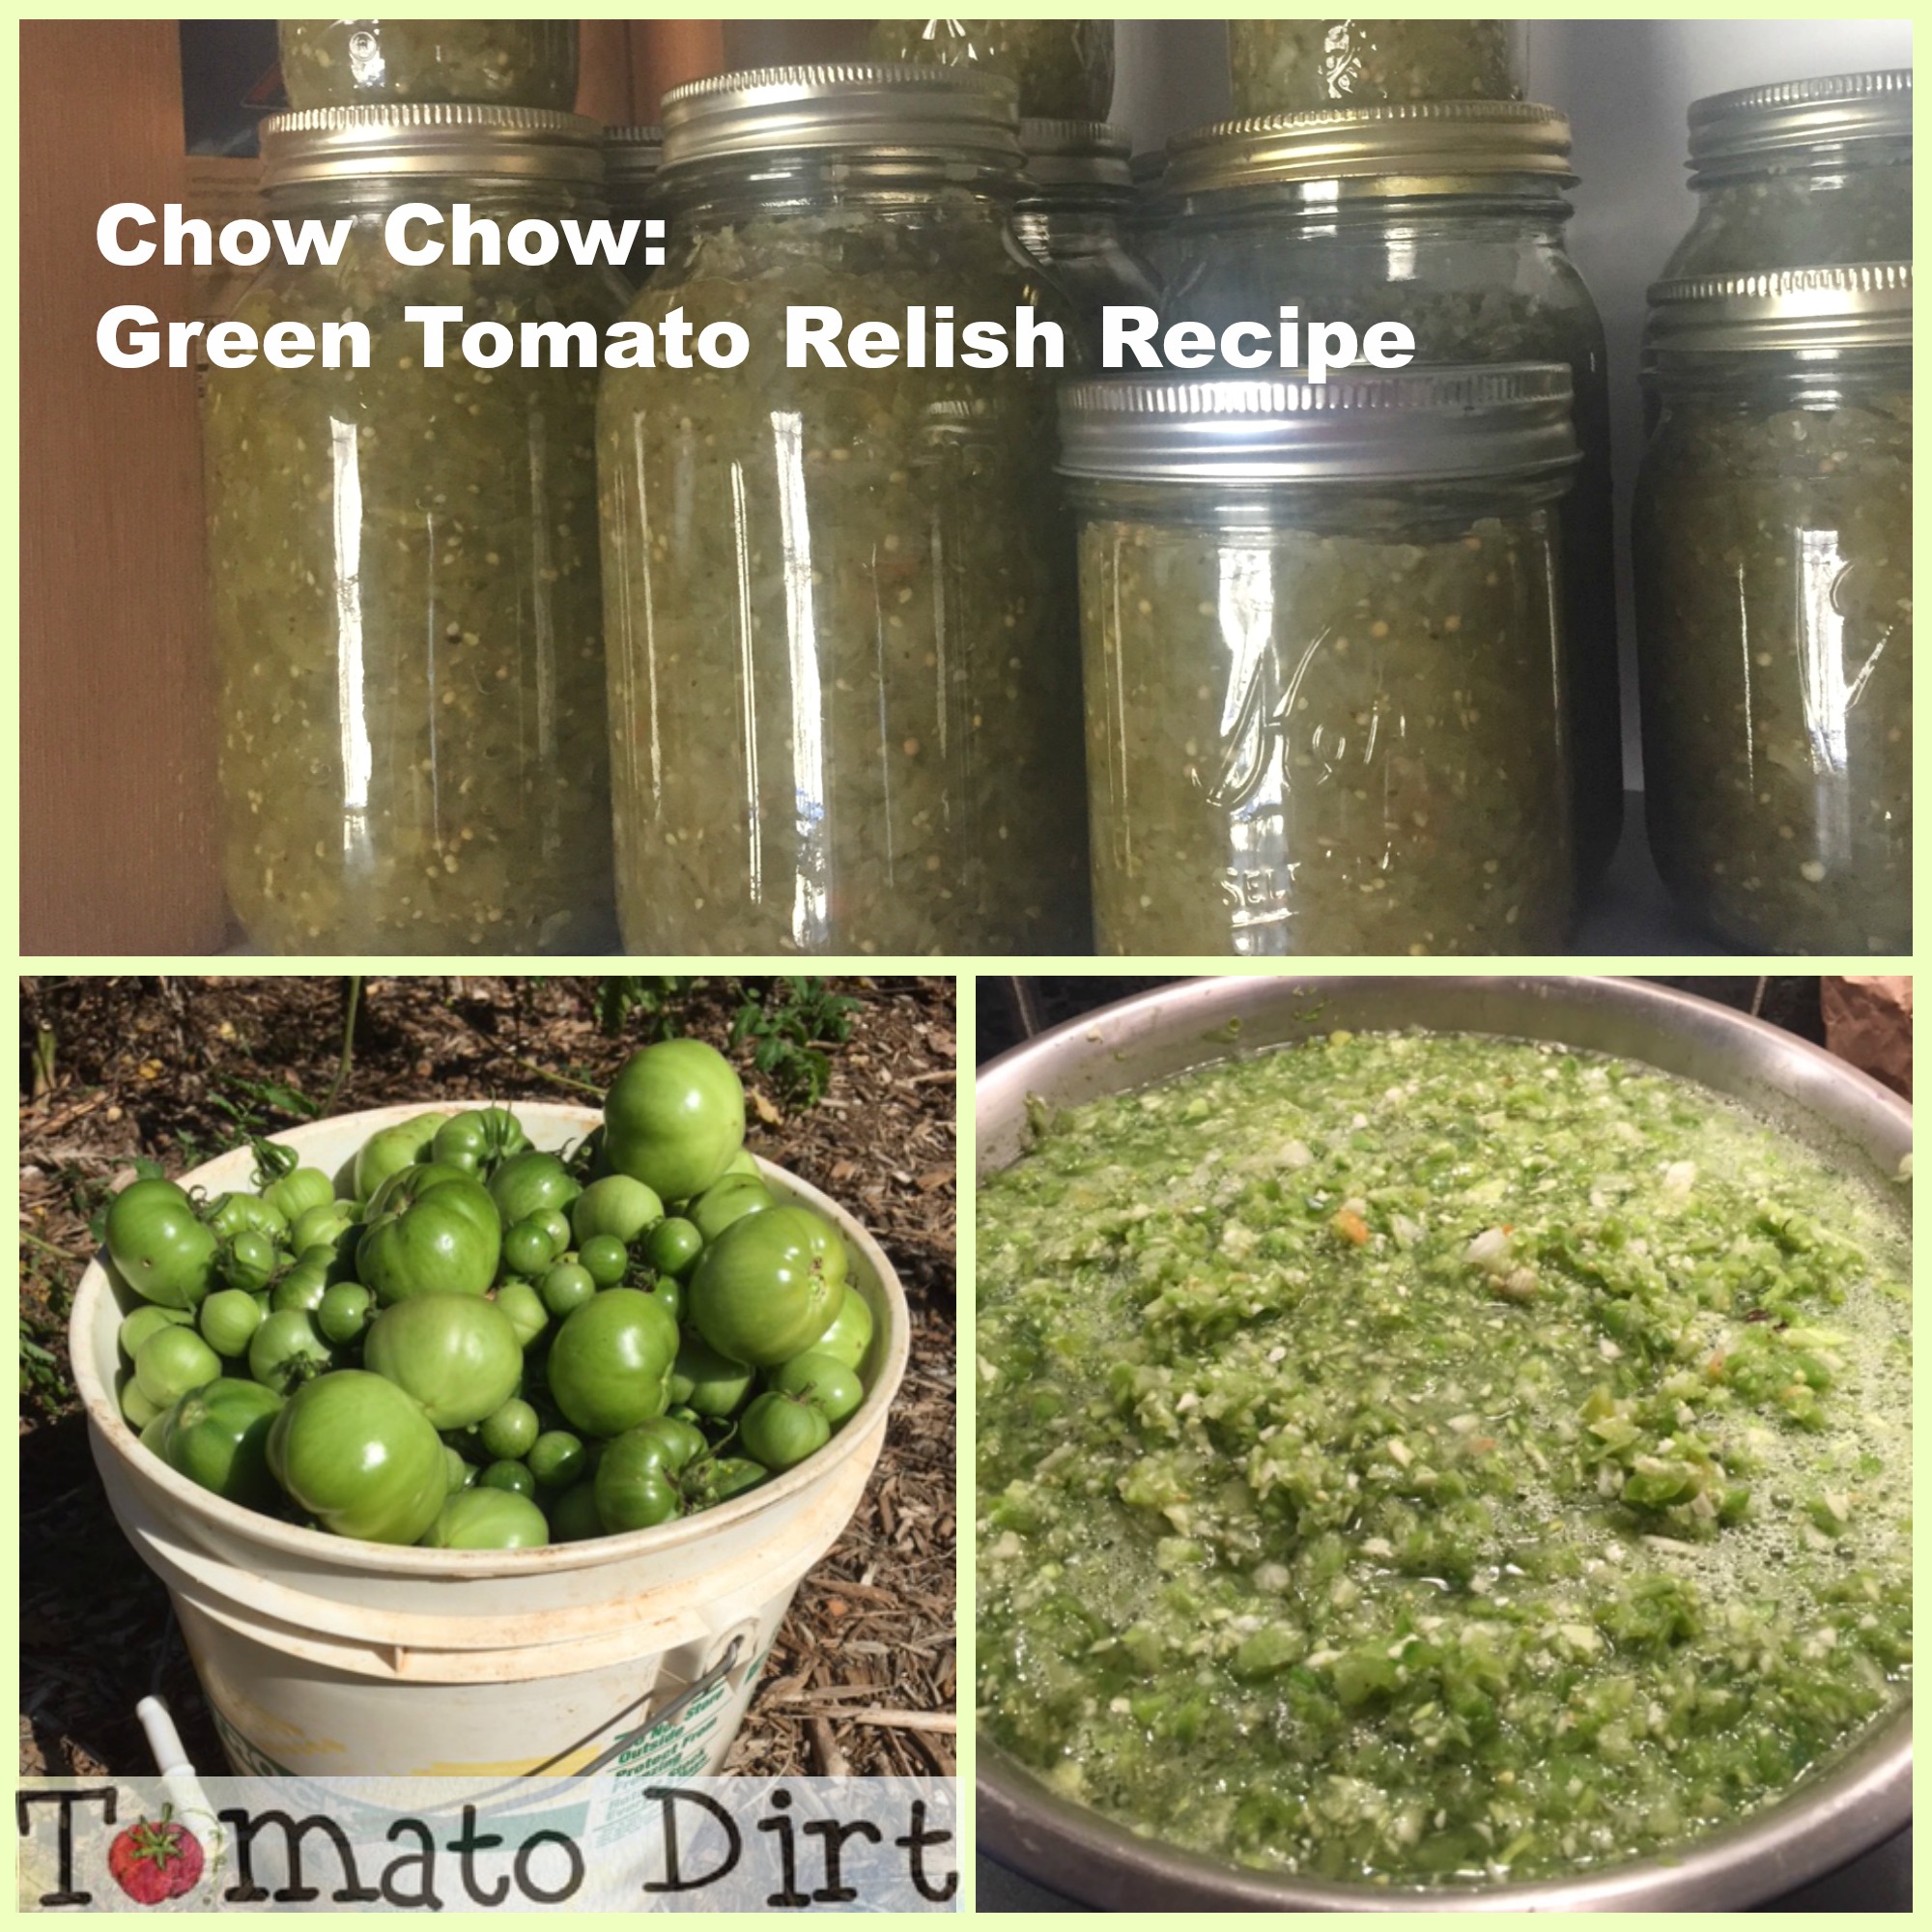 Chow Chow: Green Tomato Relish Recipe with Tomato Dirt